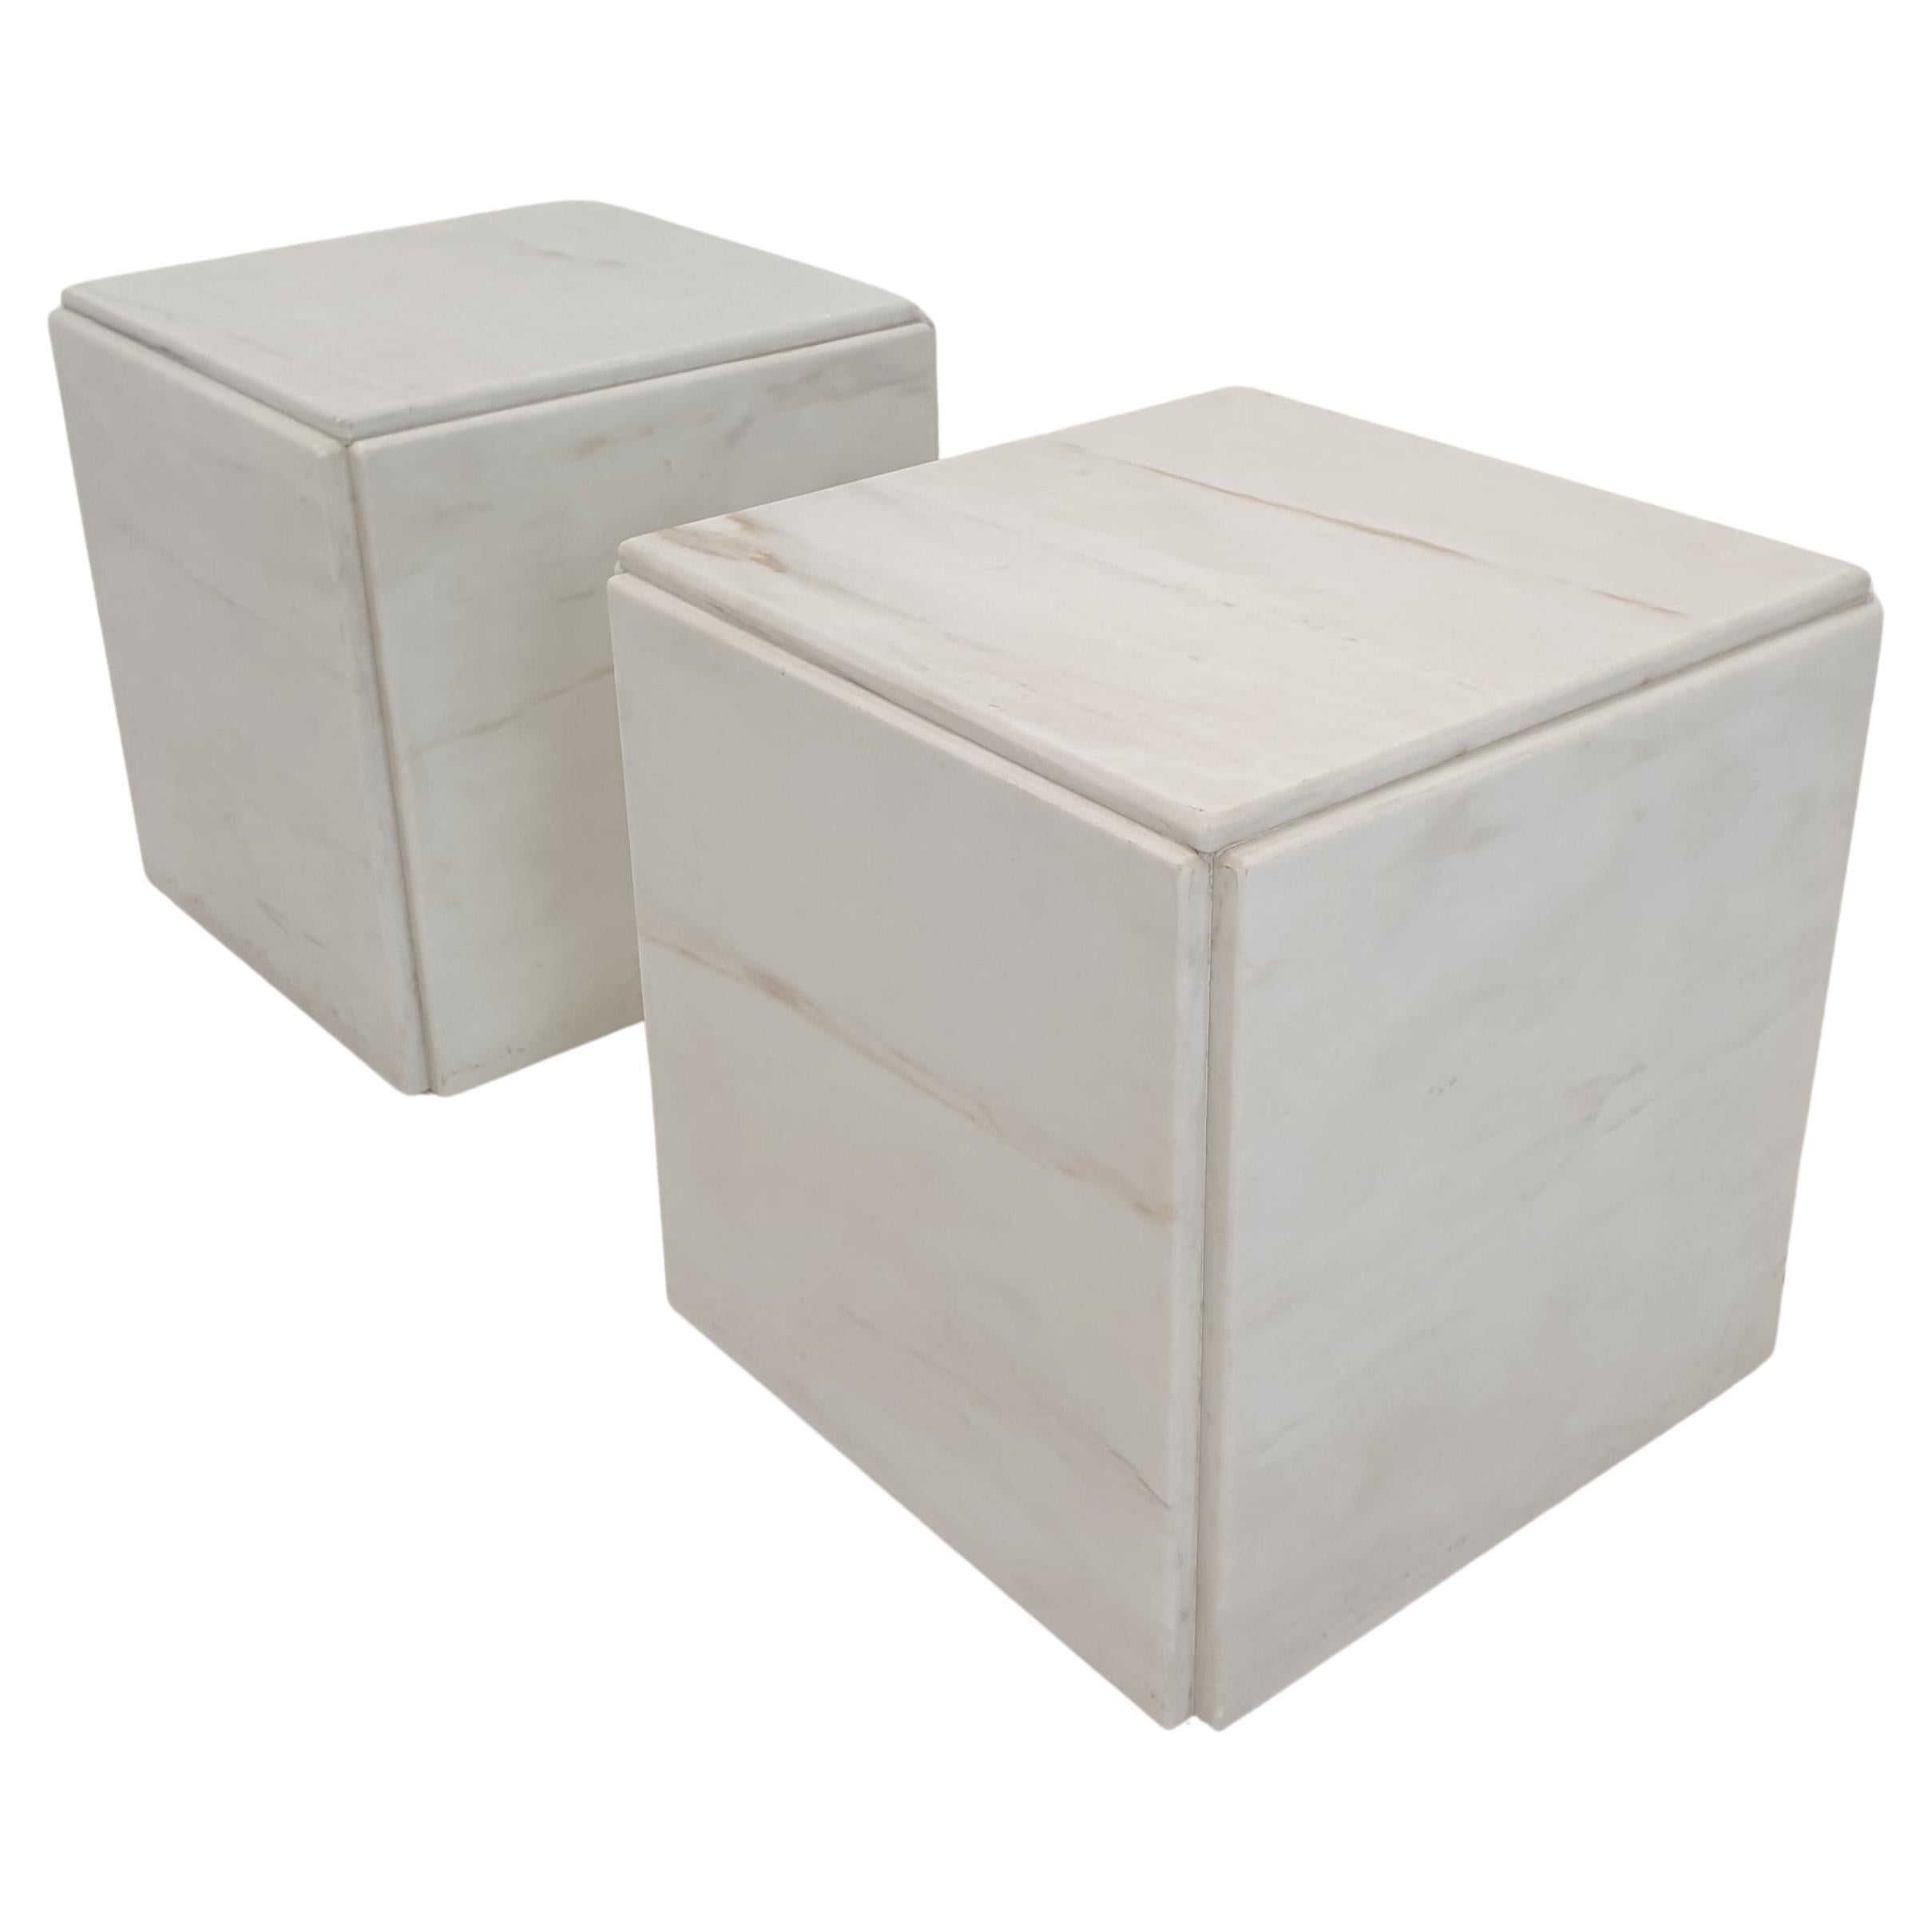 Set of 2 Italian Marble Pedestals or Side Tables, 1980's